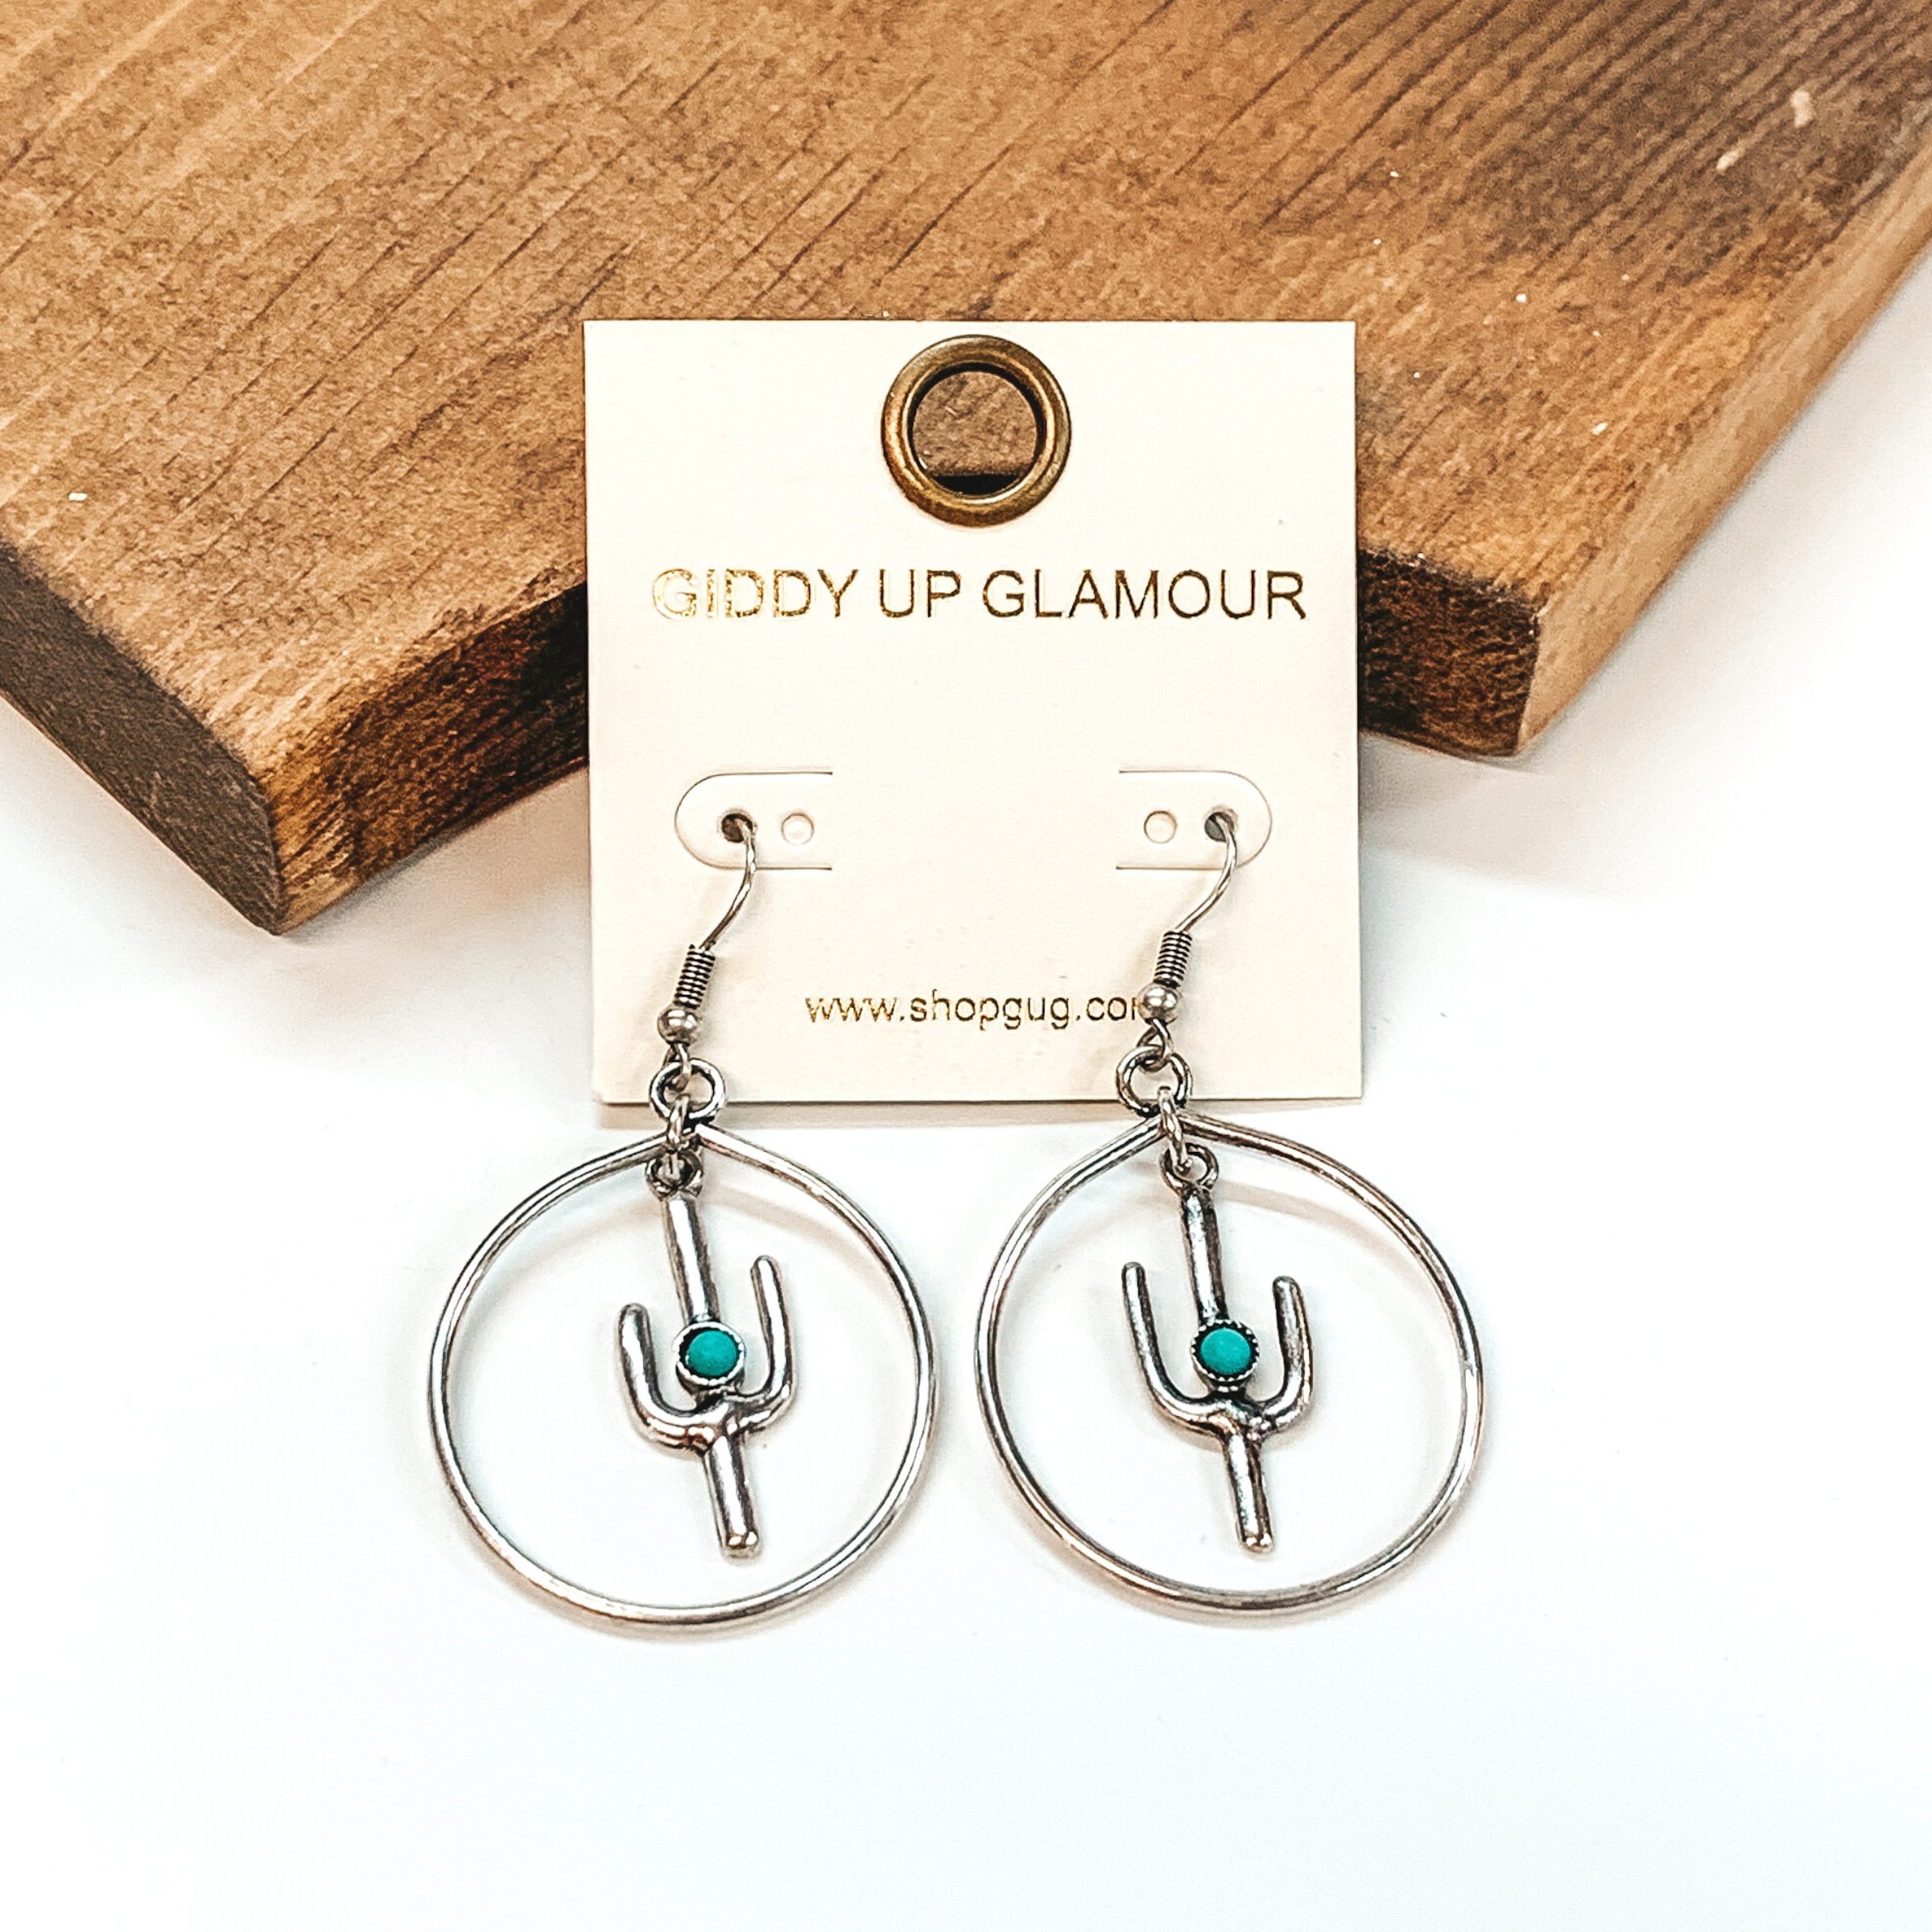 Silver fish hook earrings with a circle drop pendant. Hanging in the middle of the circle is a cactus pendant that has a tiny turquoise stone. These earrings are pictured on a white background in front of a brown block.  